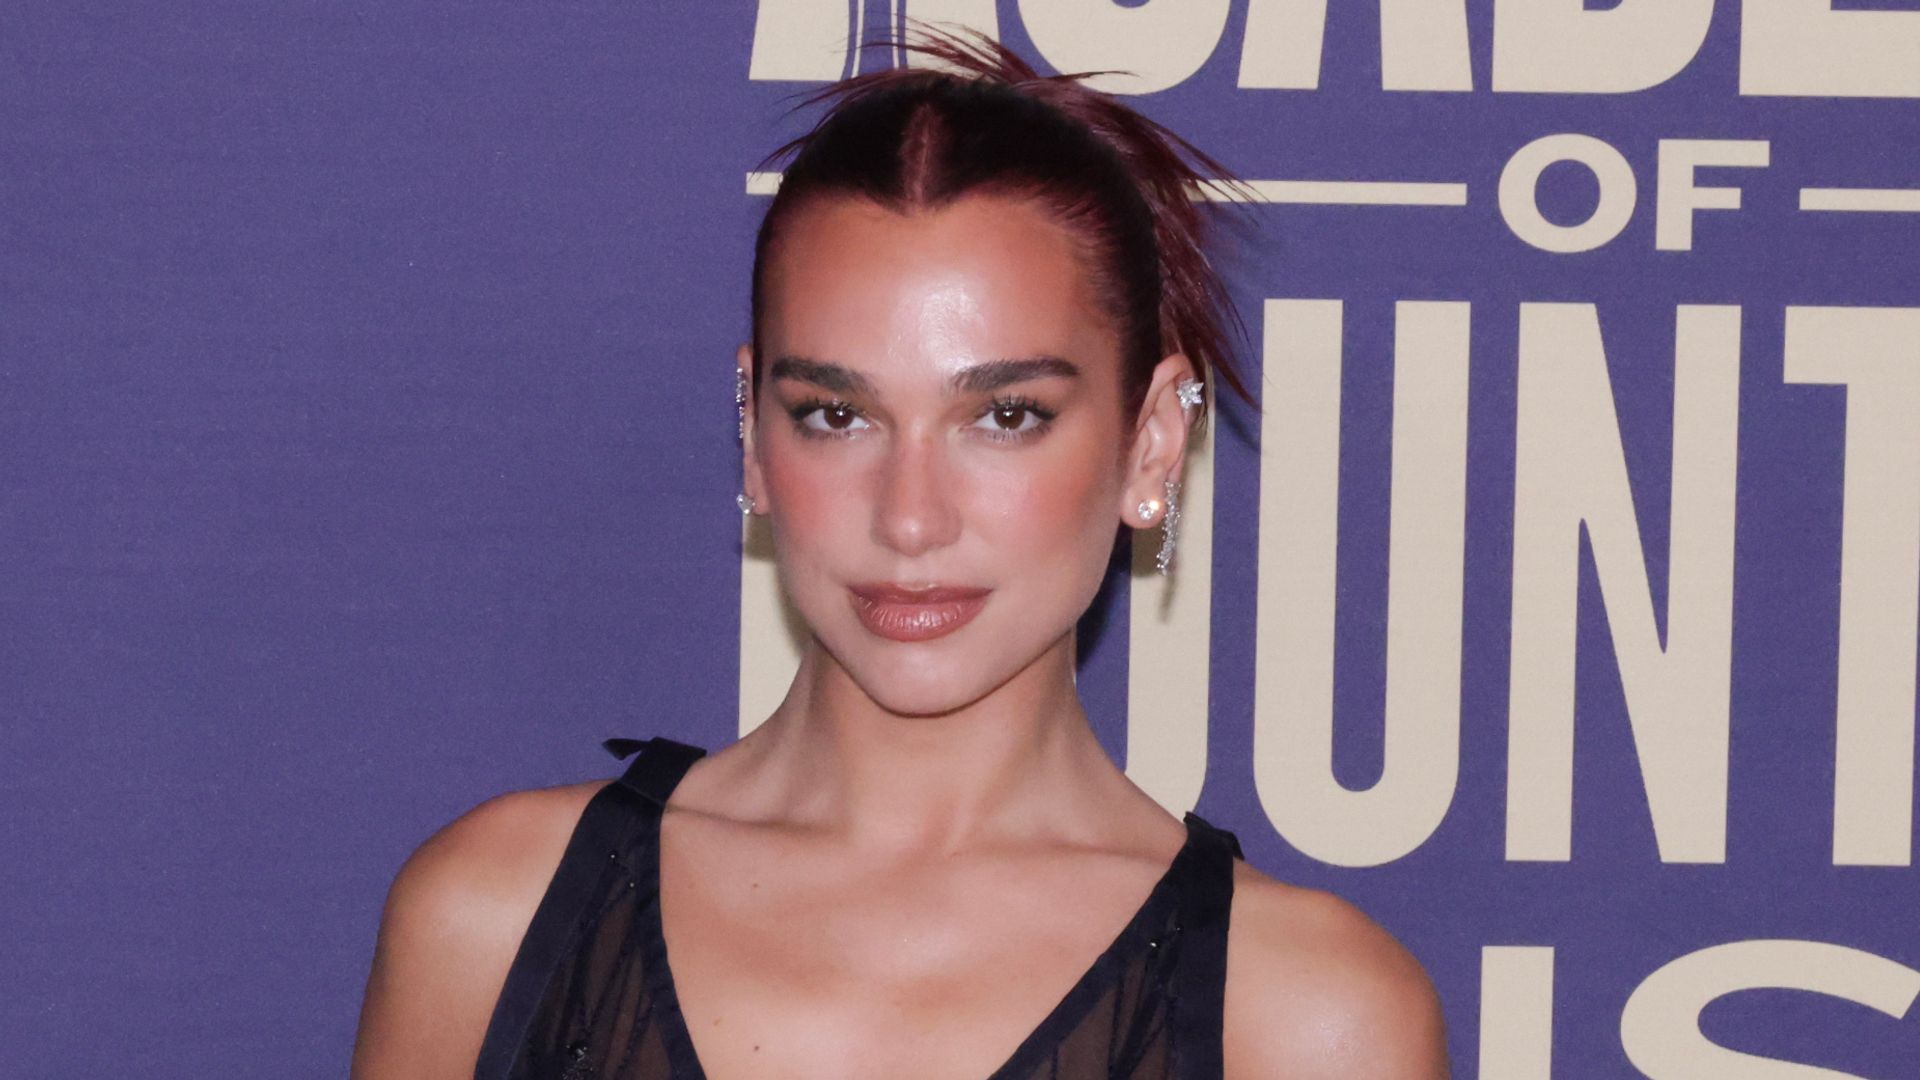 Dua Lipa exposes incredible physique in see-through dress for surprise ACM Awards performance